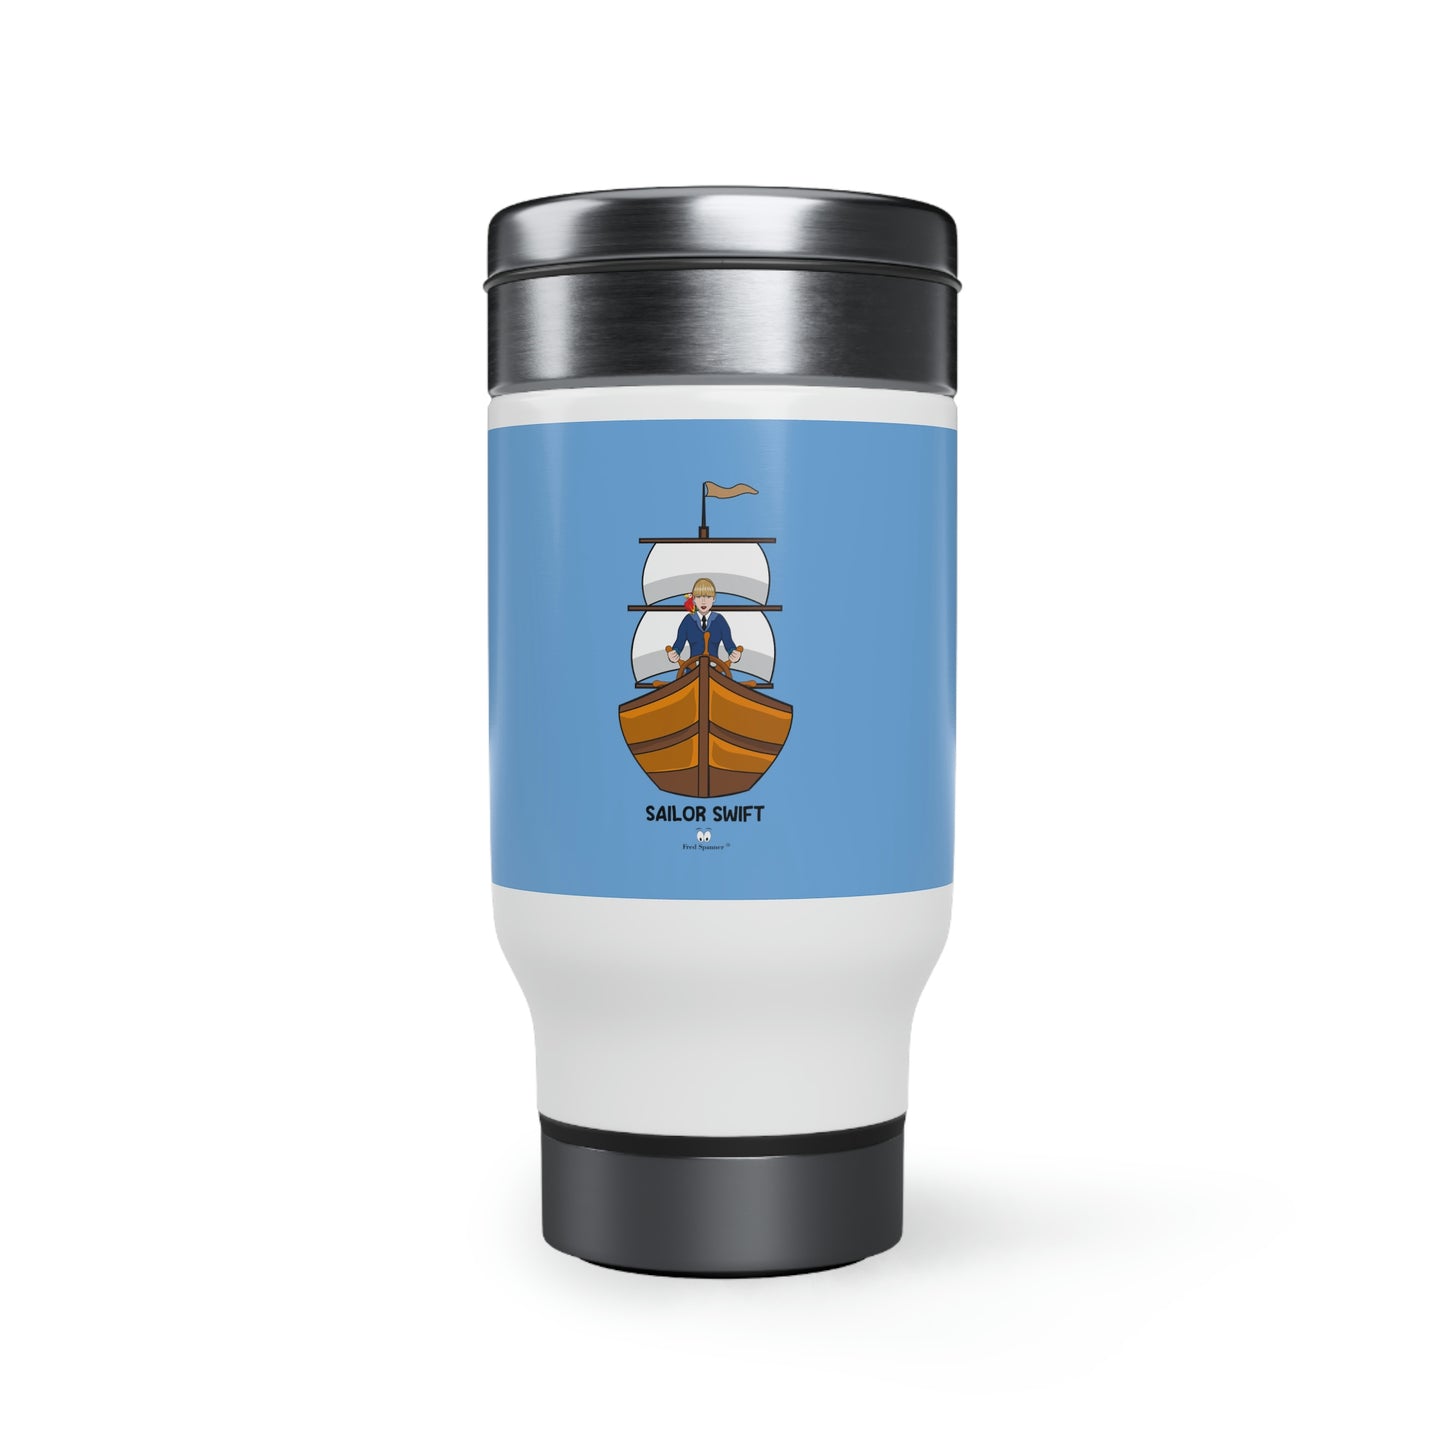 Sailor Swift Stainless Steel Travel Mug with Handle